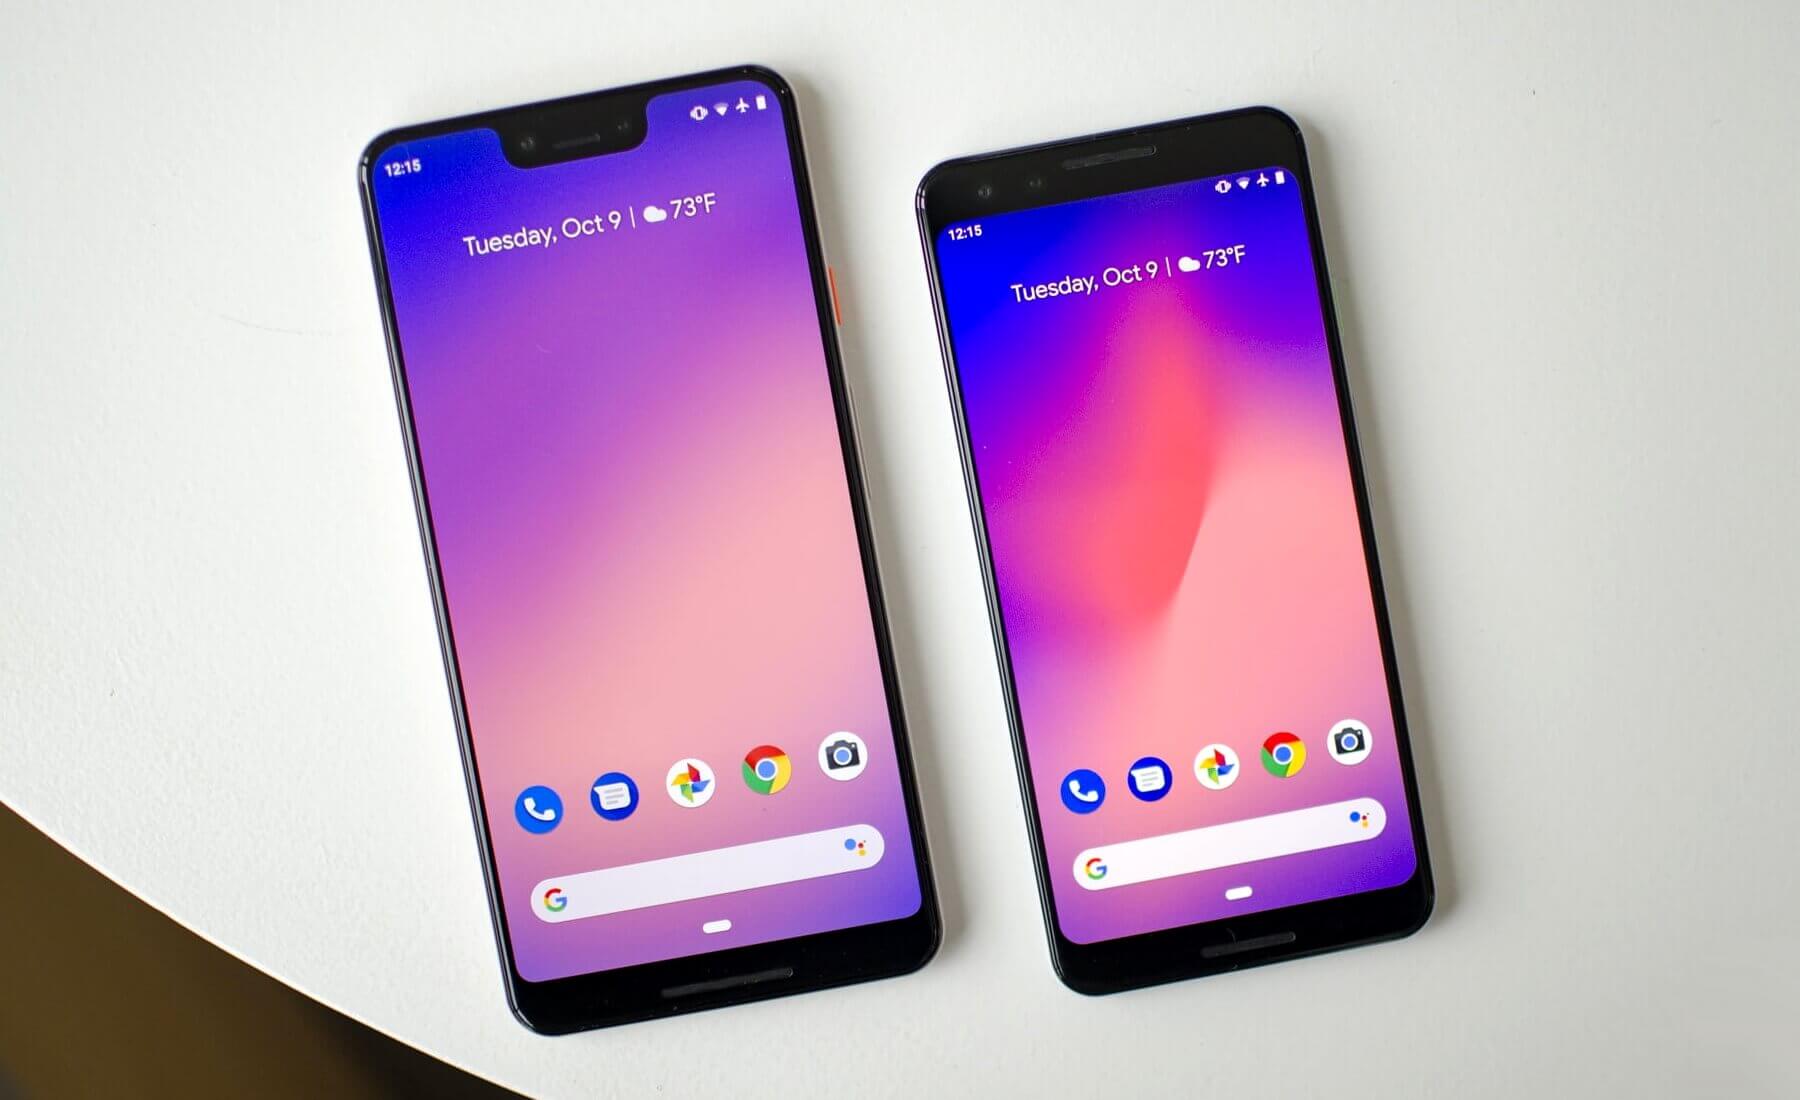 Pixel 3 and Pixel 3 XL smartphones will get the latest update early next year